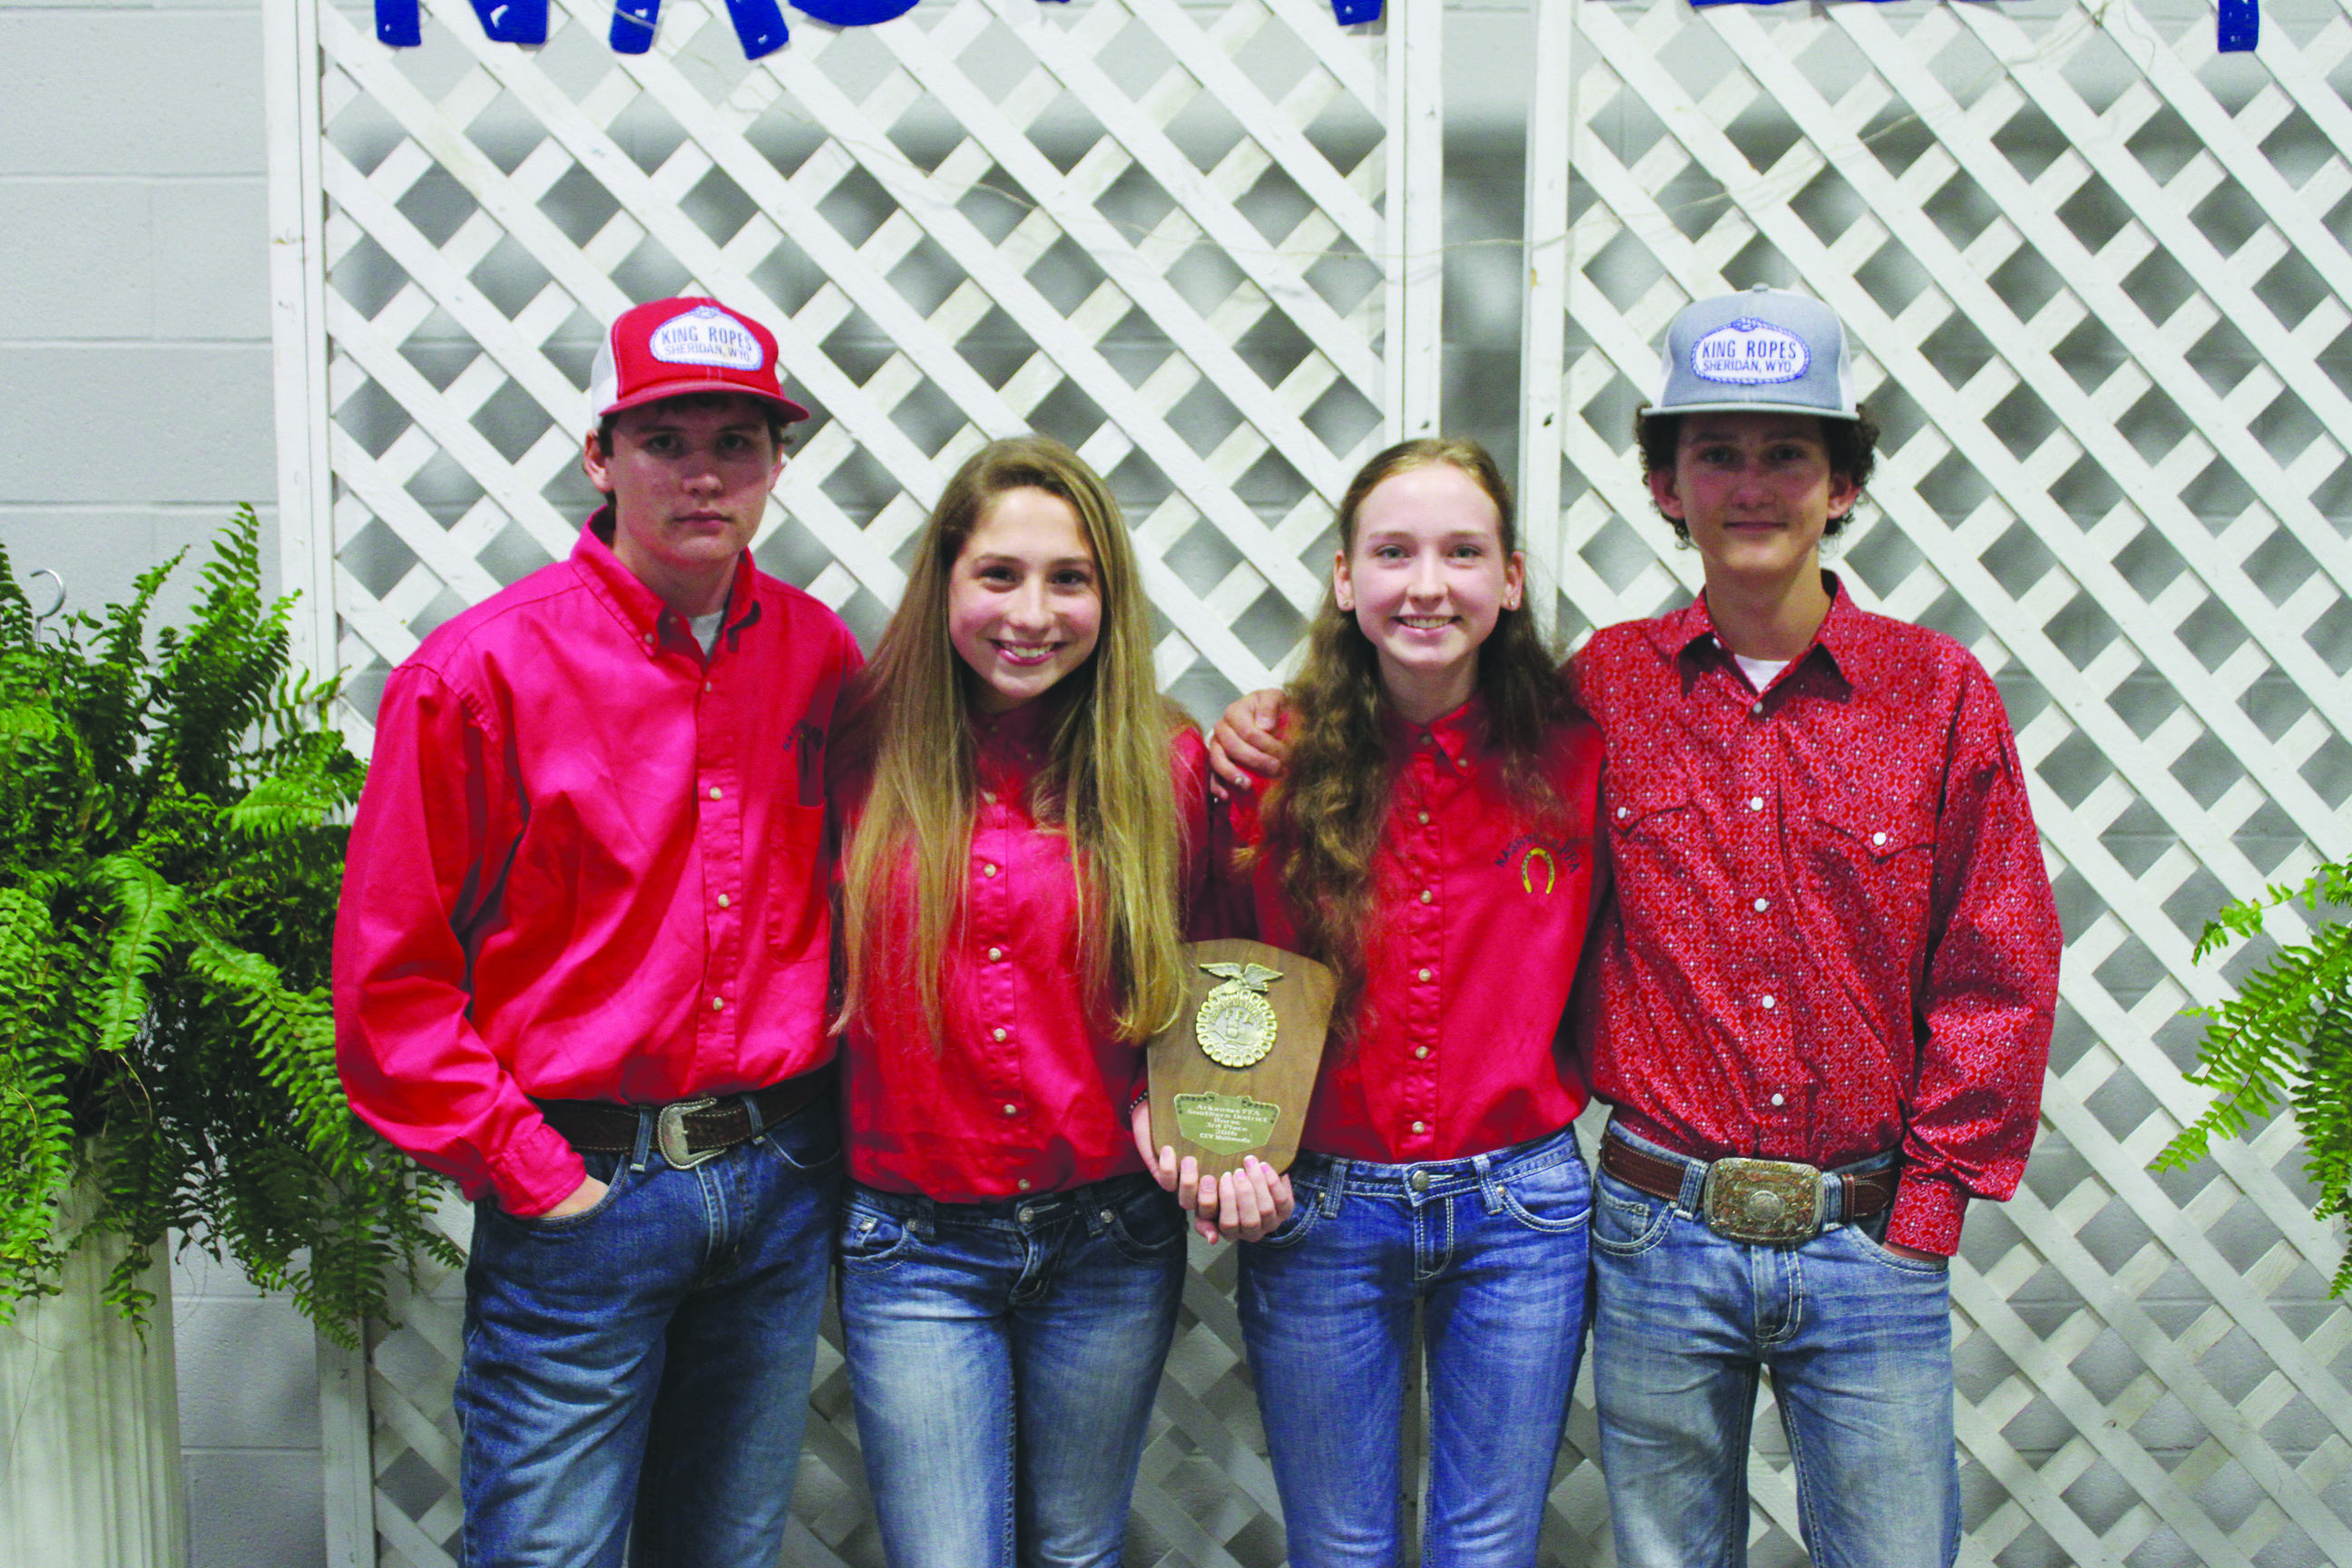 The Nashville FFA Horse Judging Team made up of Trevor Harris, Bravyn Bell, Hannah Barfield and Scotty Clay stand with there third place district trophy. The team is a new addition to the Nashville chapter of the FFA and has already competed at the state level in their first season.